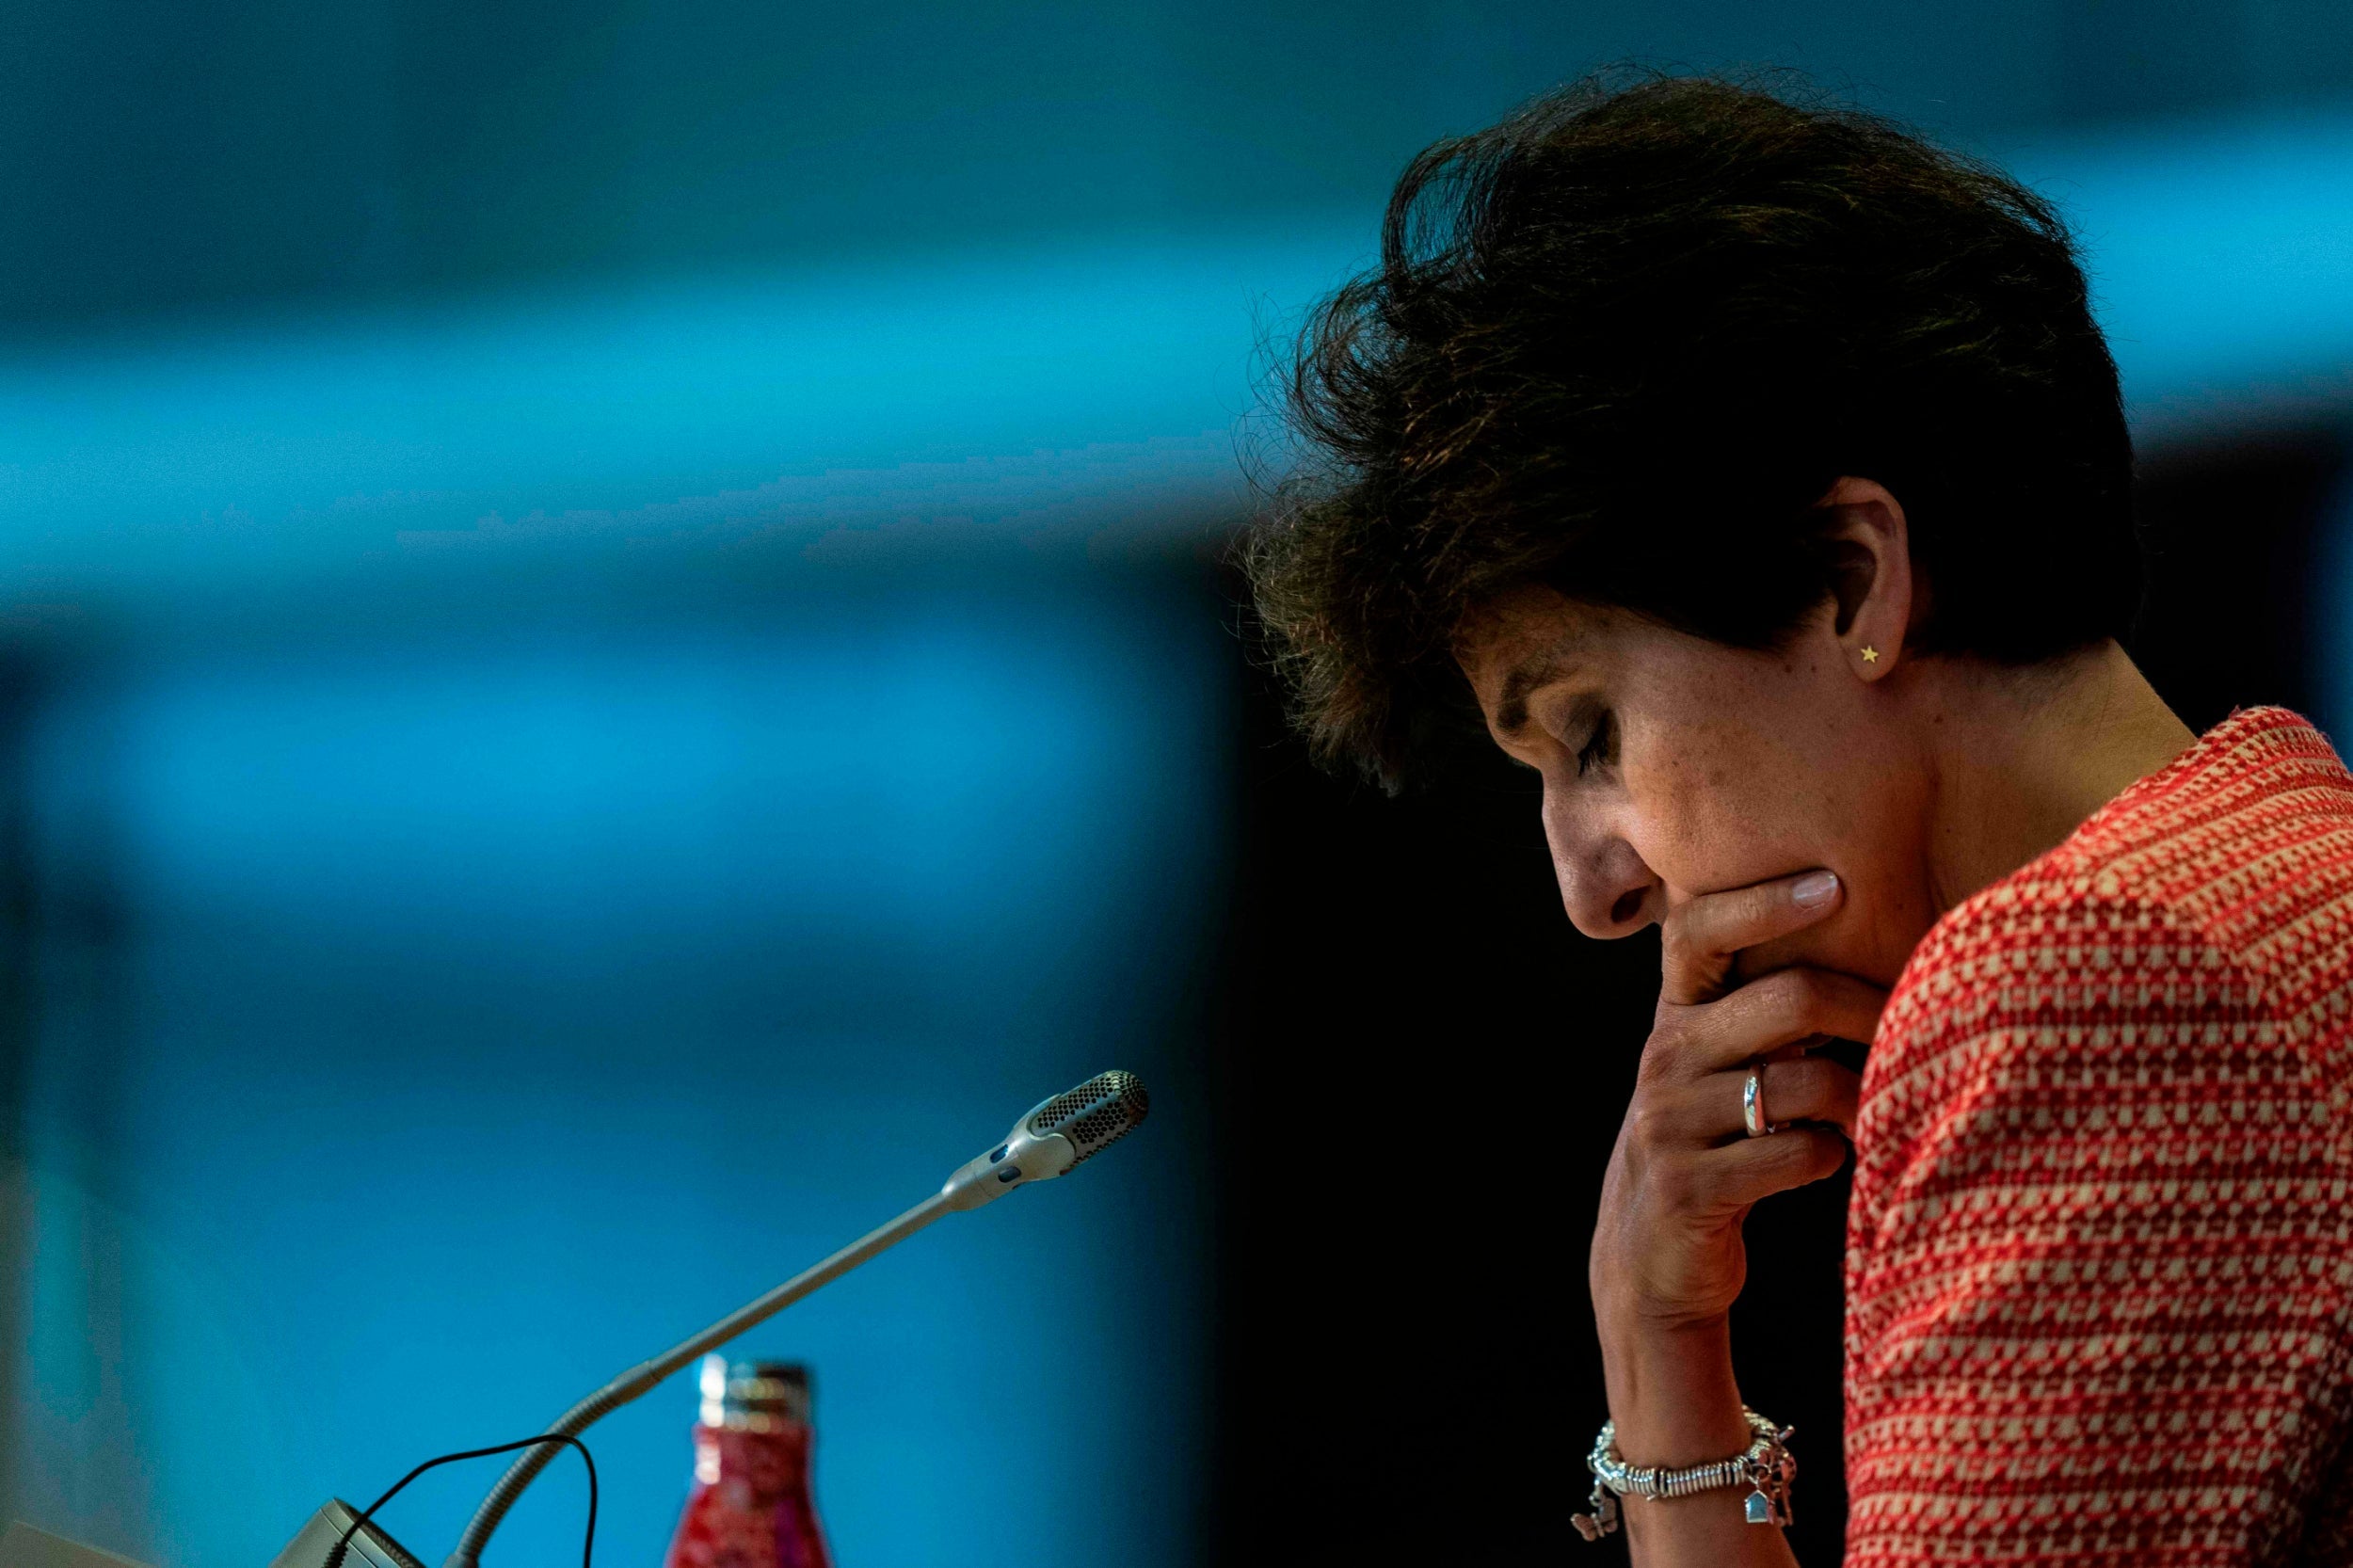 Sylvie Goulard struggled to answer questions during her hearing at the European Parliament